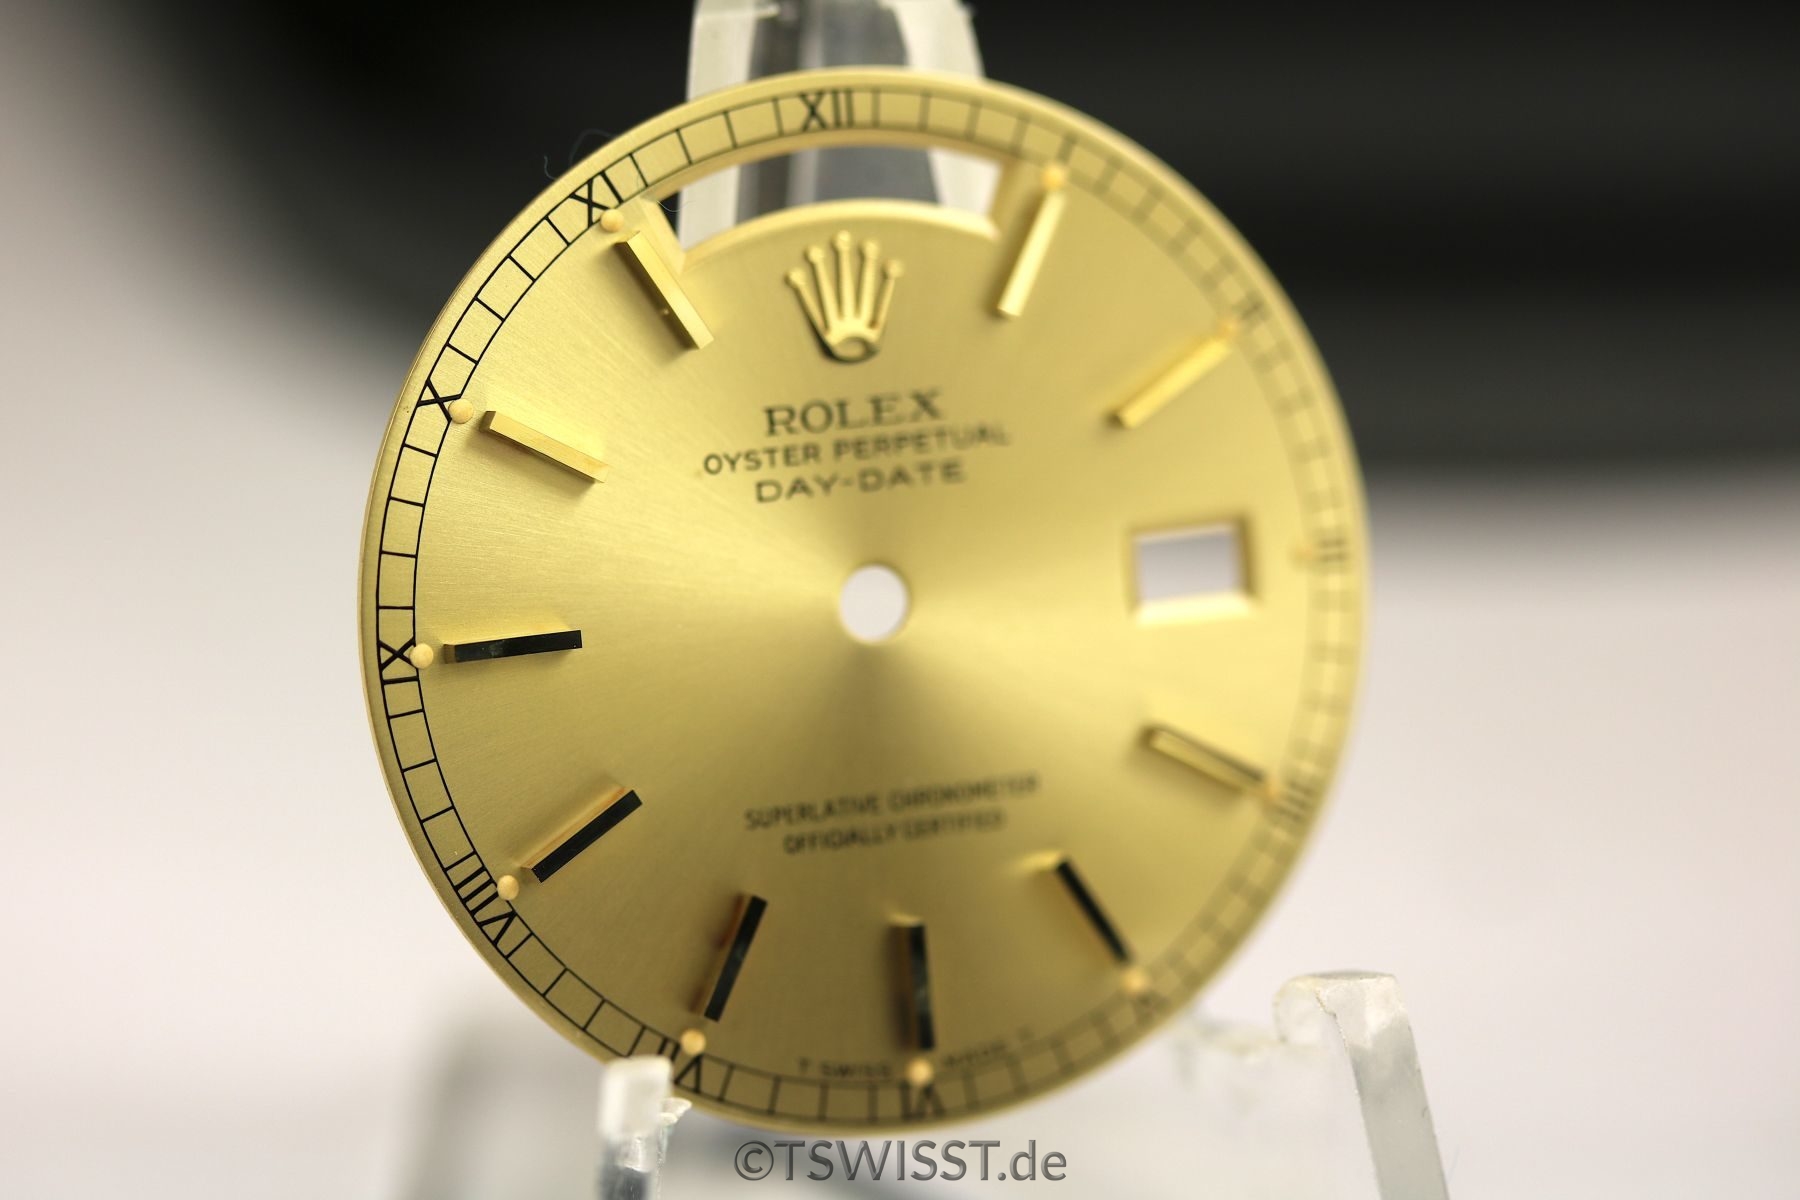 Rolex Day Date dial